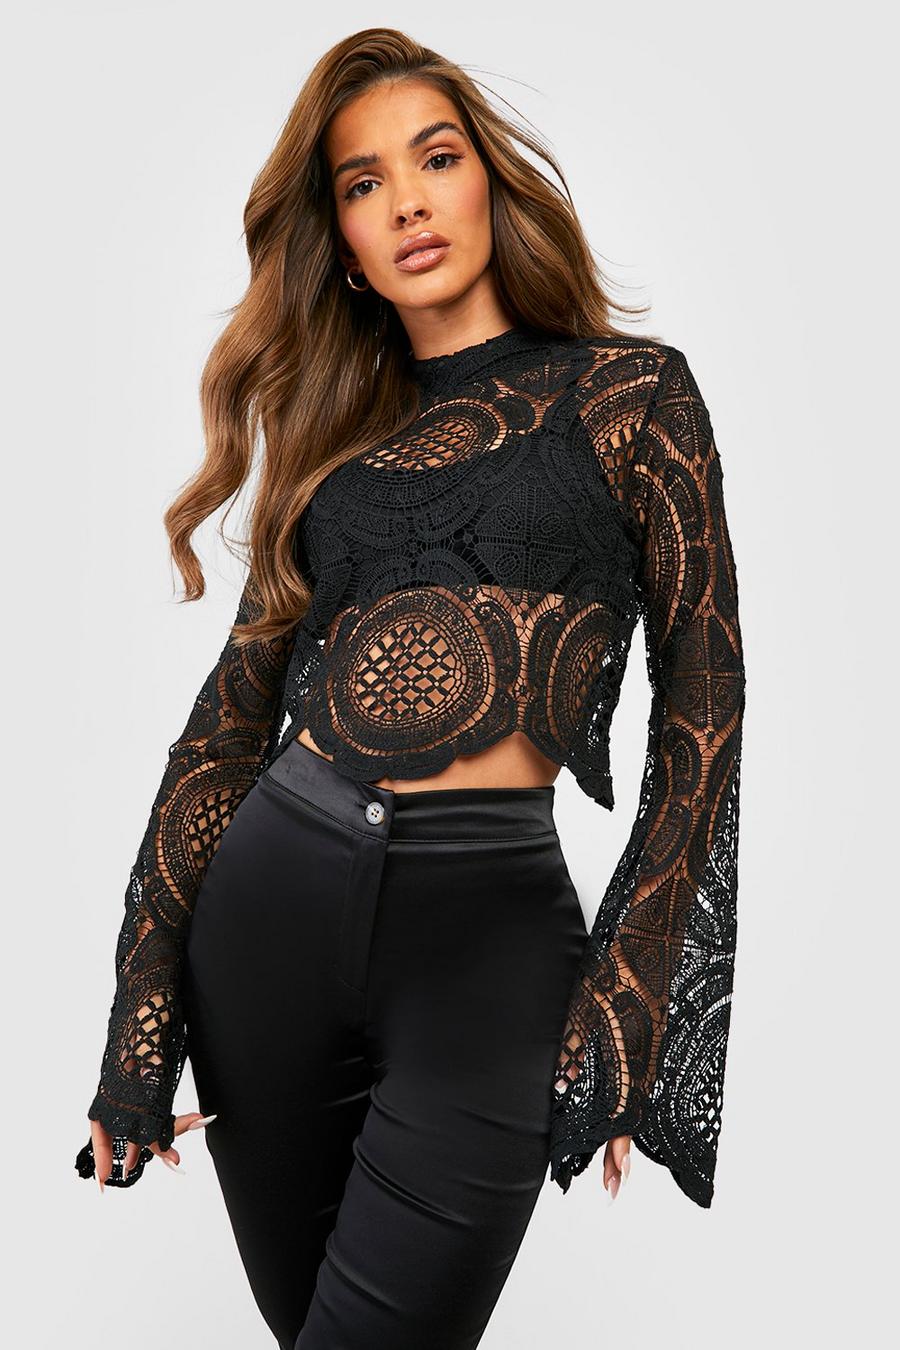 Lace Tops, Lace Crop Tops